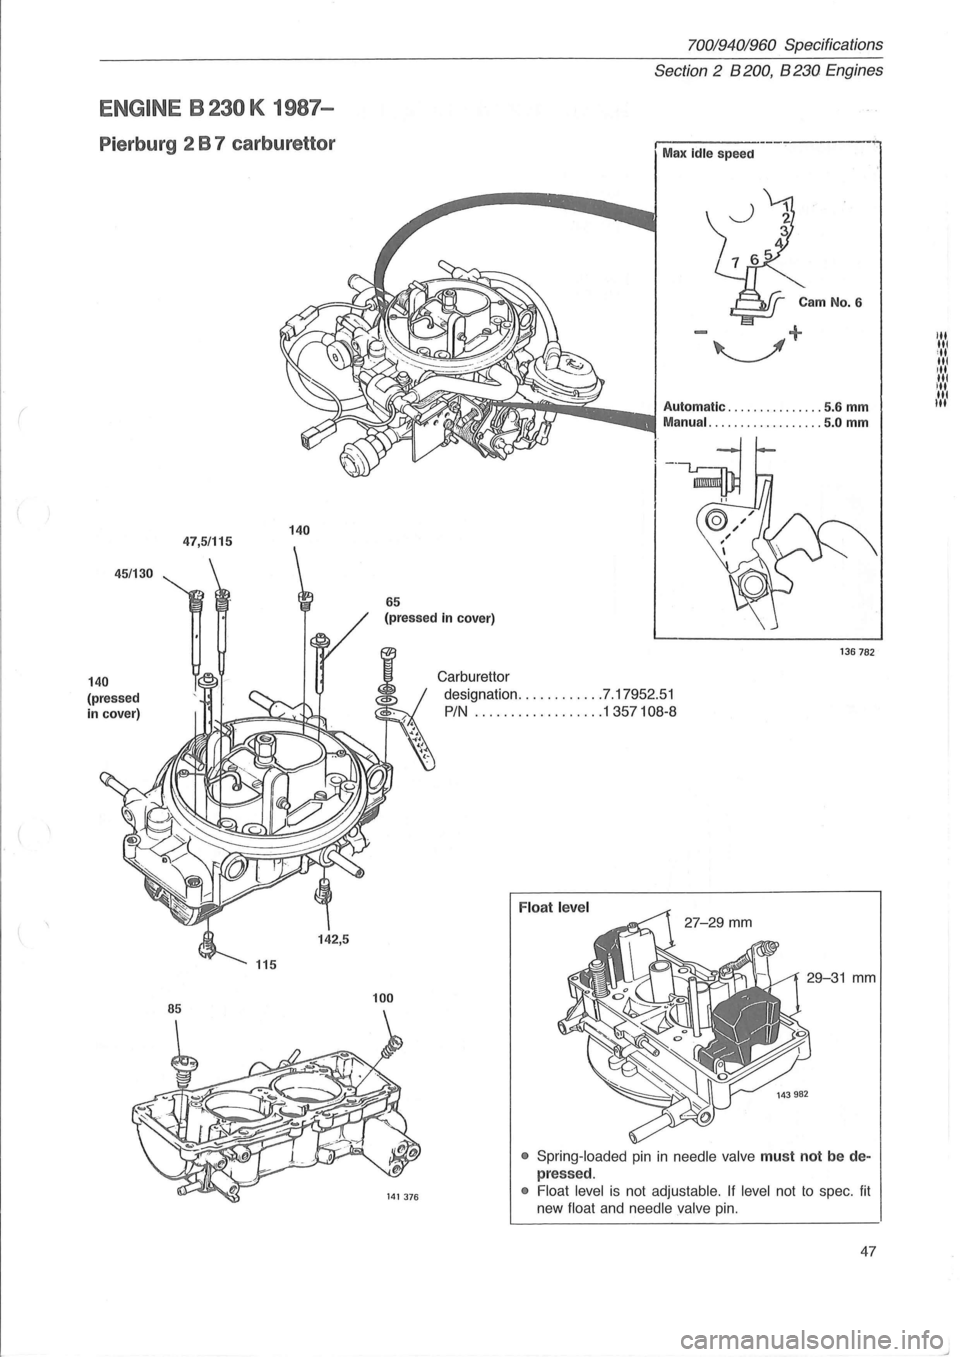 VOLVO 960 1982  Service Service Manual ( 
ENGINE B 230 K 1987-
Pierburg  2 B 7 carburettor 
45/130 
140 
(pressed 
in  cover) 
47,5/115 140 
142,5 
70019401960 Specifications 
Section 2 B 200, B 230 Eng ines 
I ----. -----, Max Idle speed 